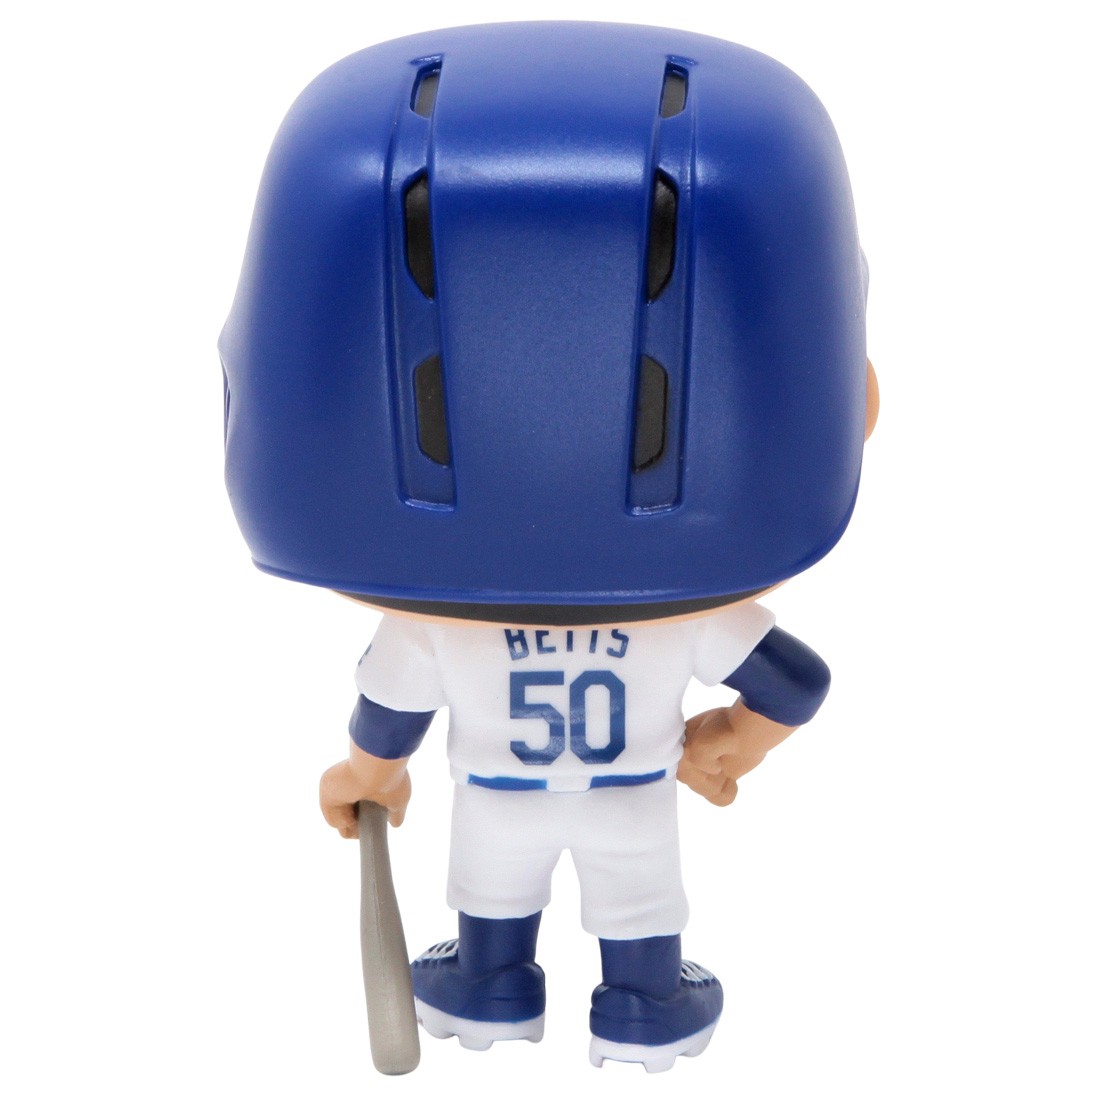 POP Funko Pop! MLB: Dodgers - Mookie Betts (Home Uniform) (Bundled with  Compatible Plastic Pop Box Protector Case), 3.75 inches